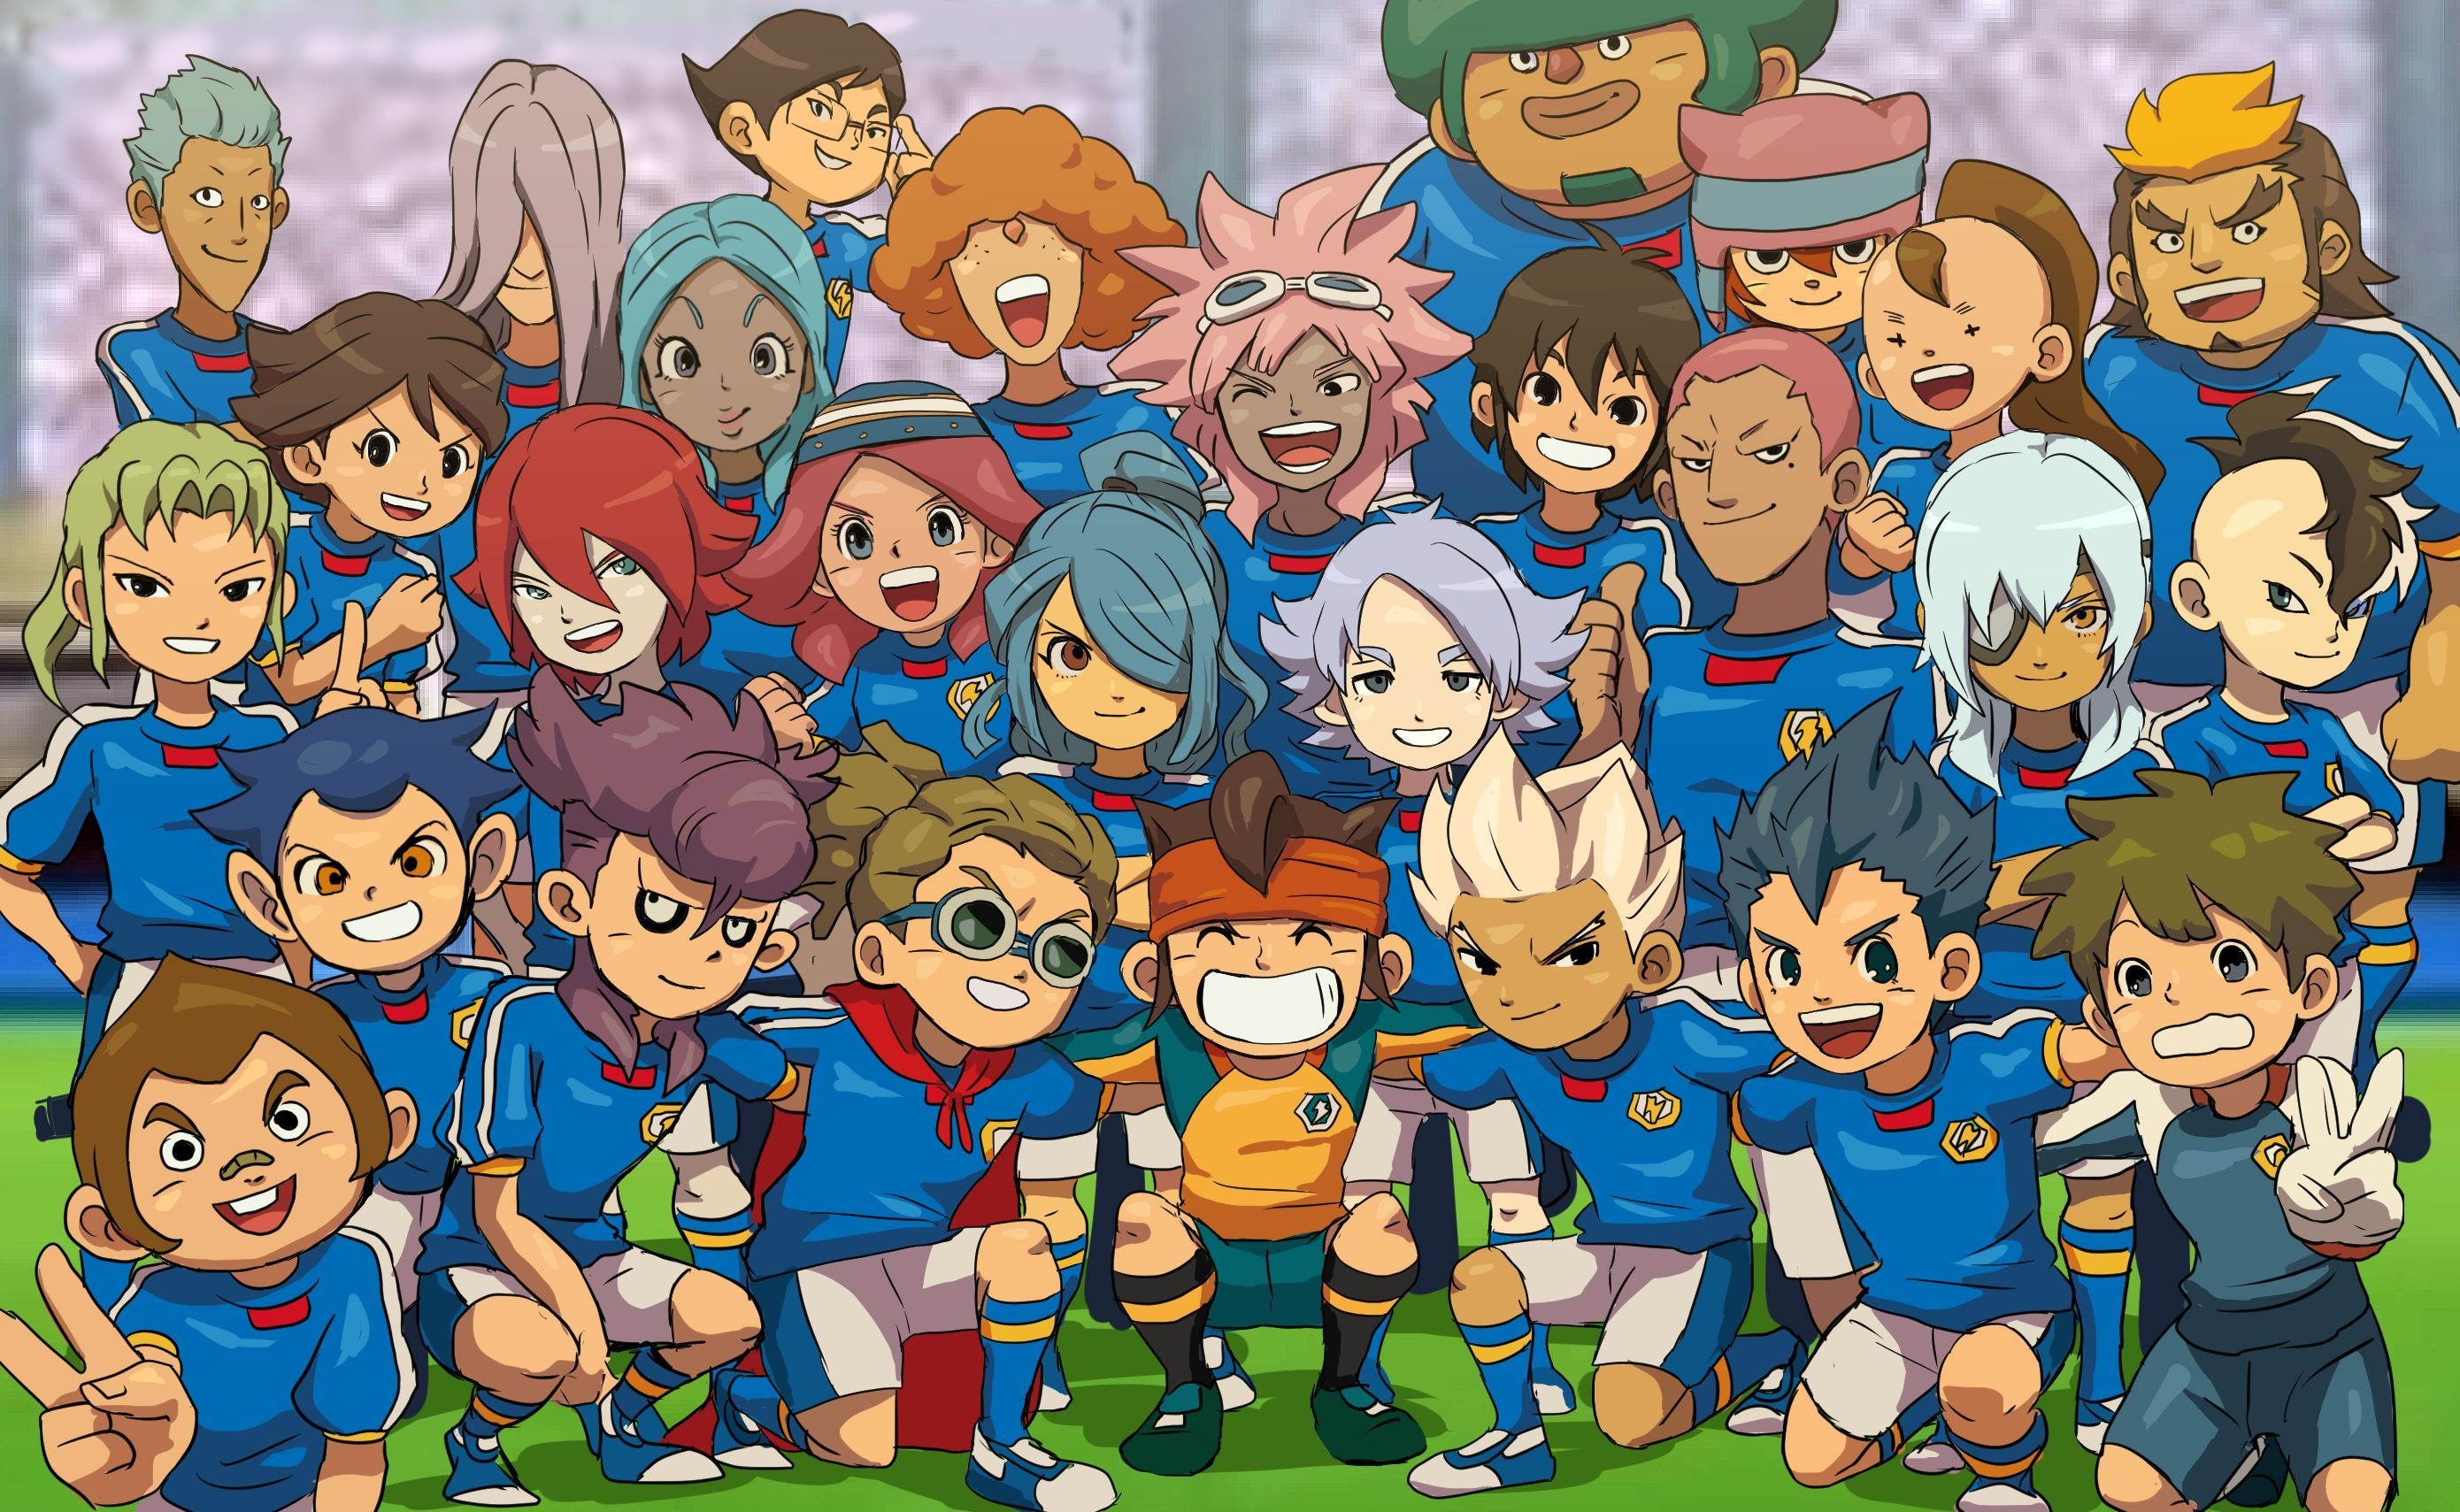 Inazuma Eleven, Anime wallpapers, Soccer team, collection, 2780x1710 HD Desktop